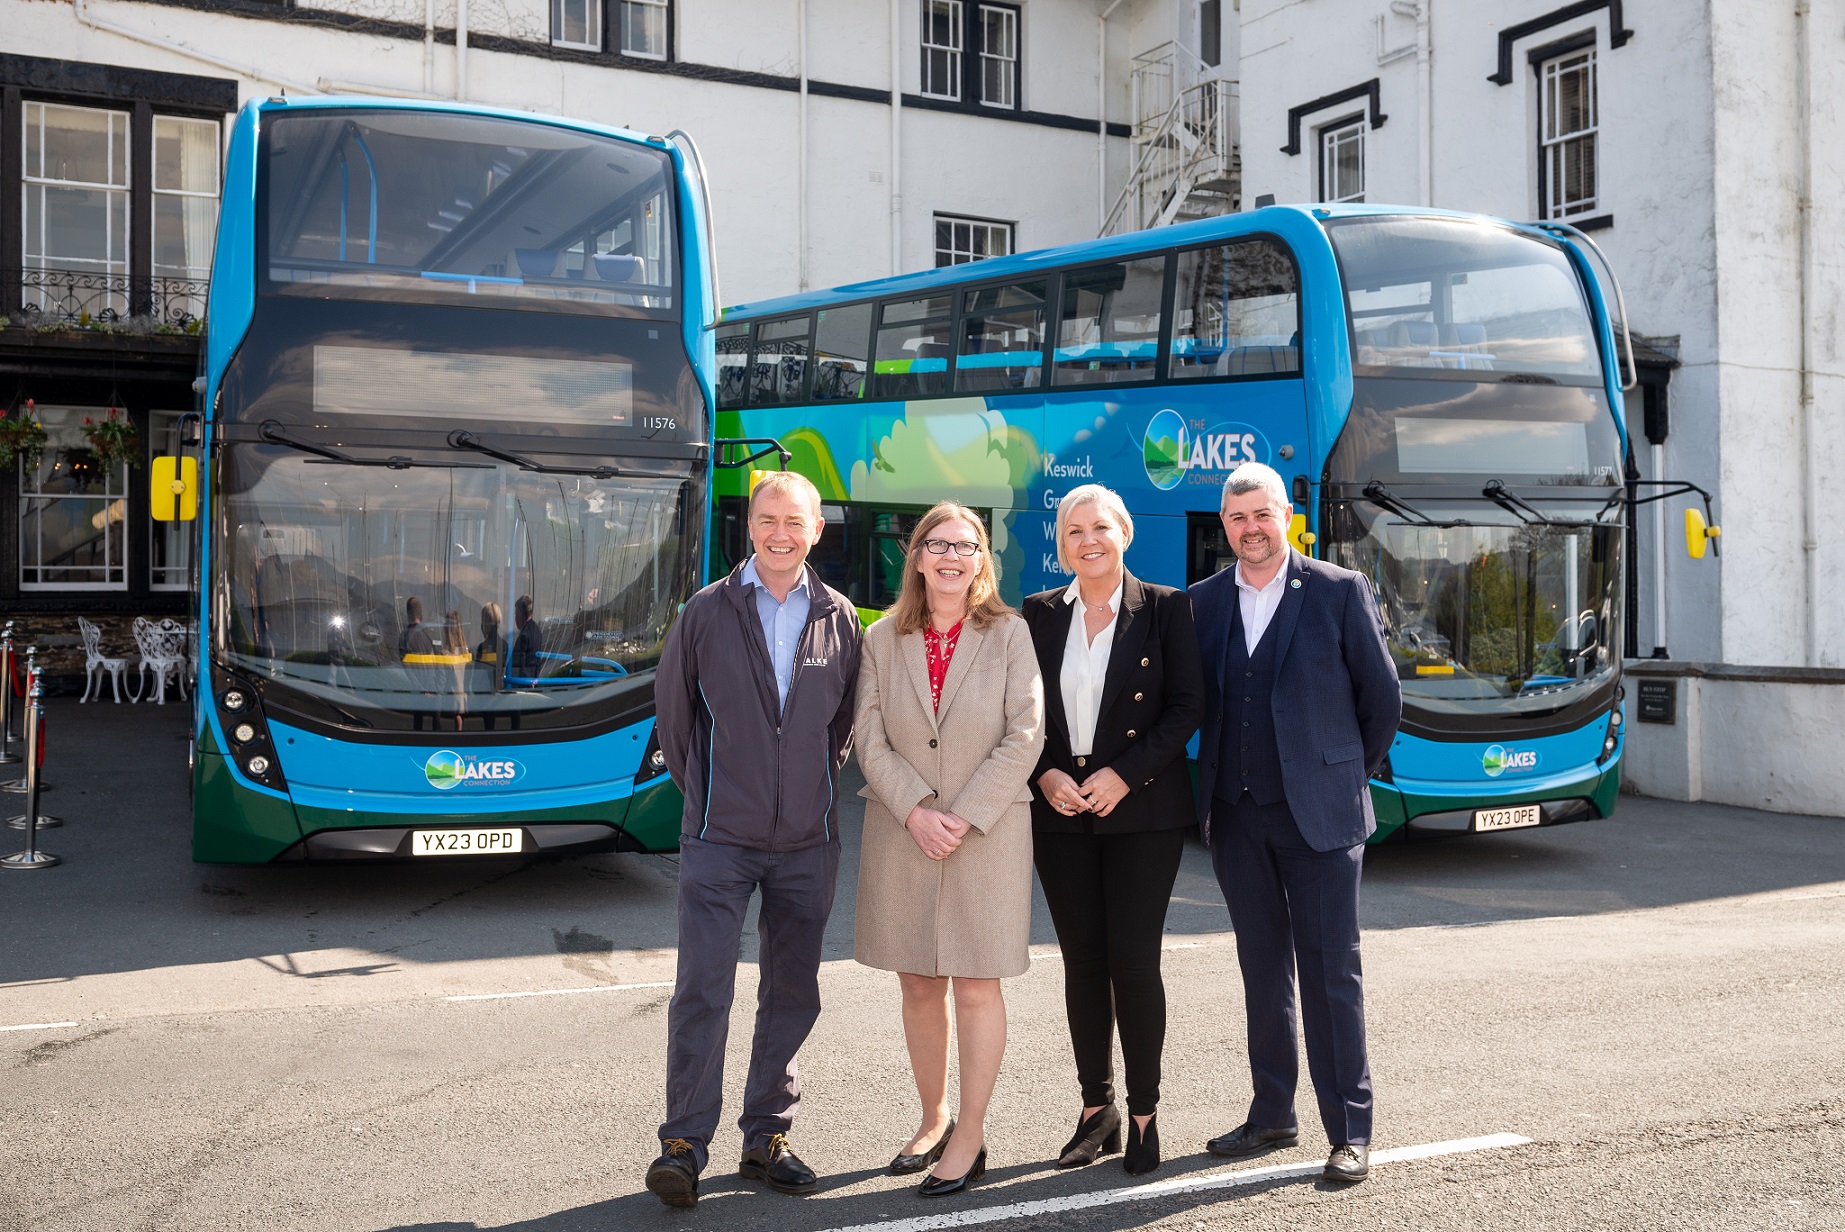 Stagecoach 555 new buses launched